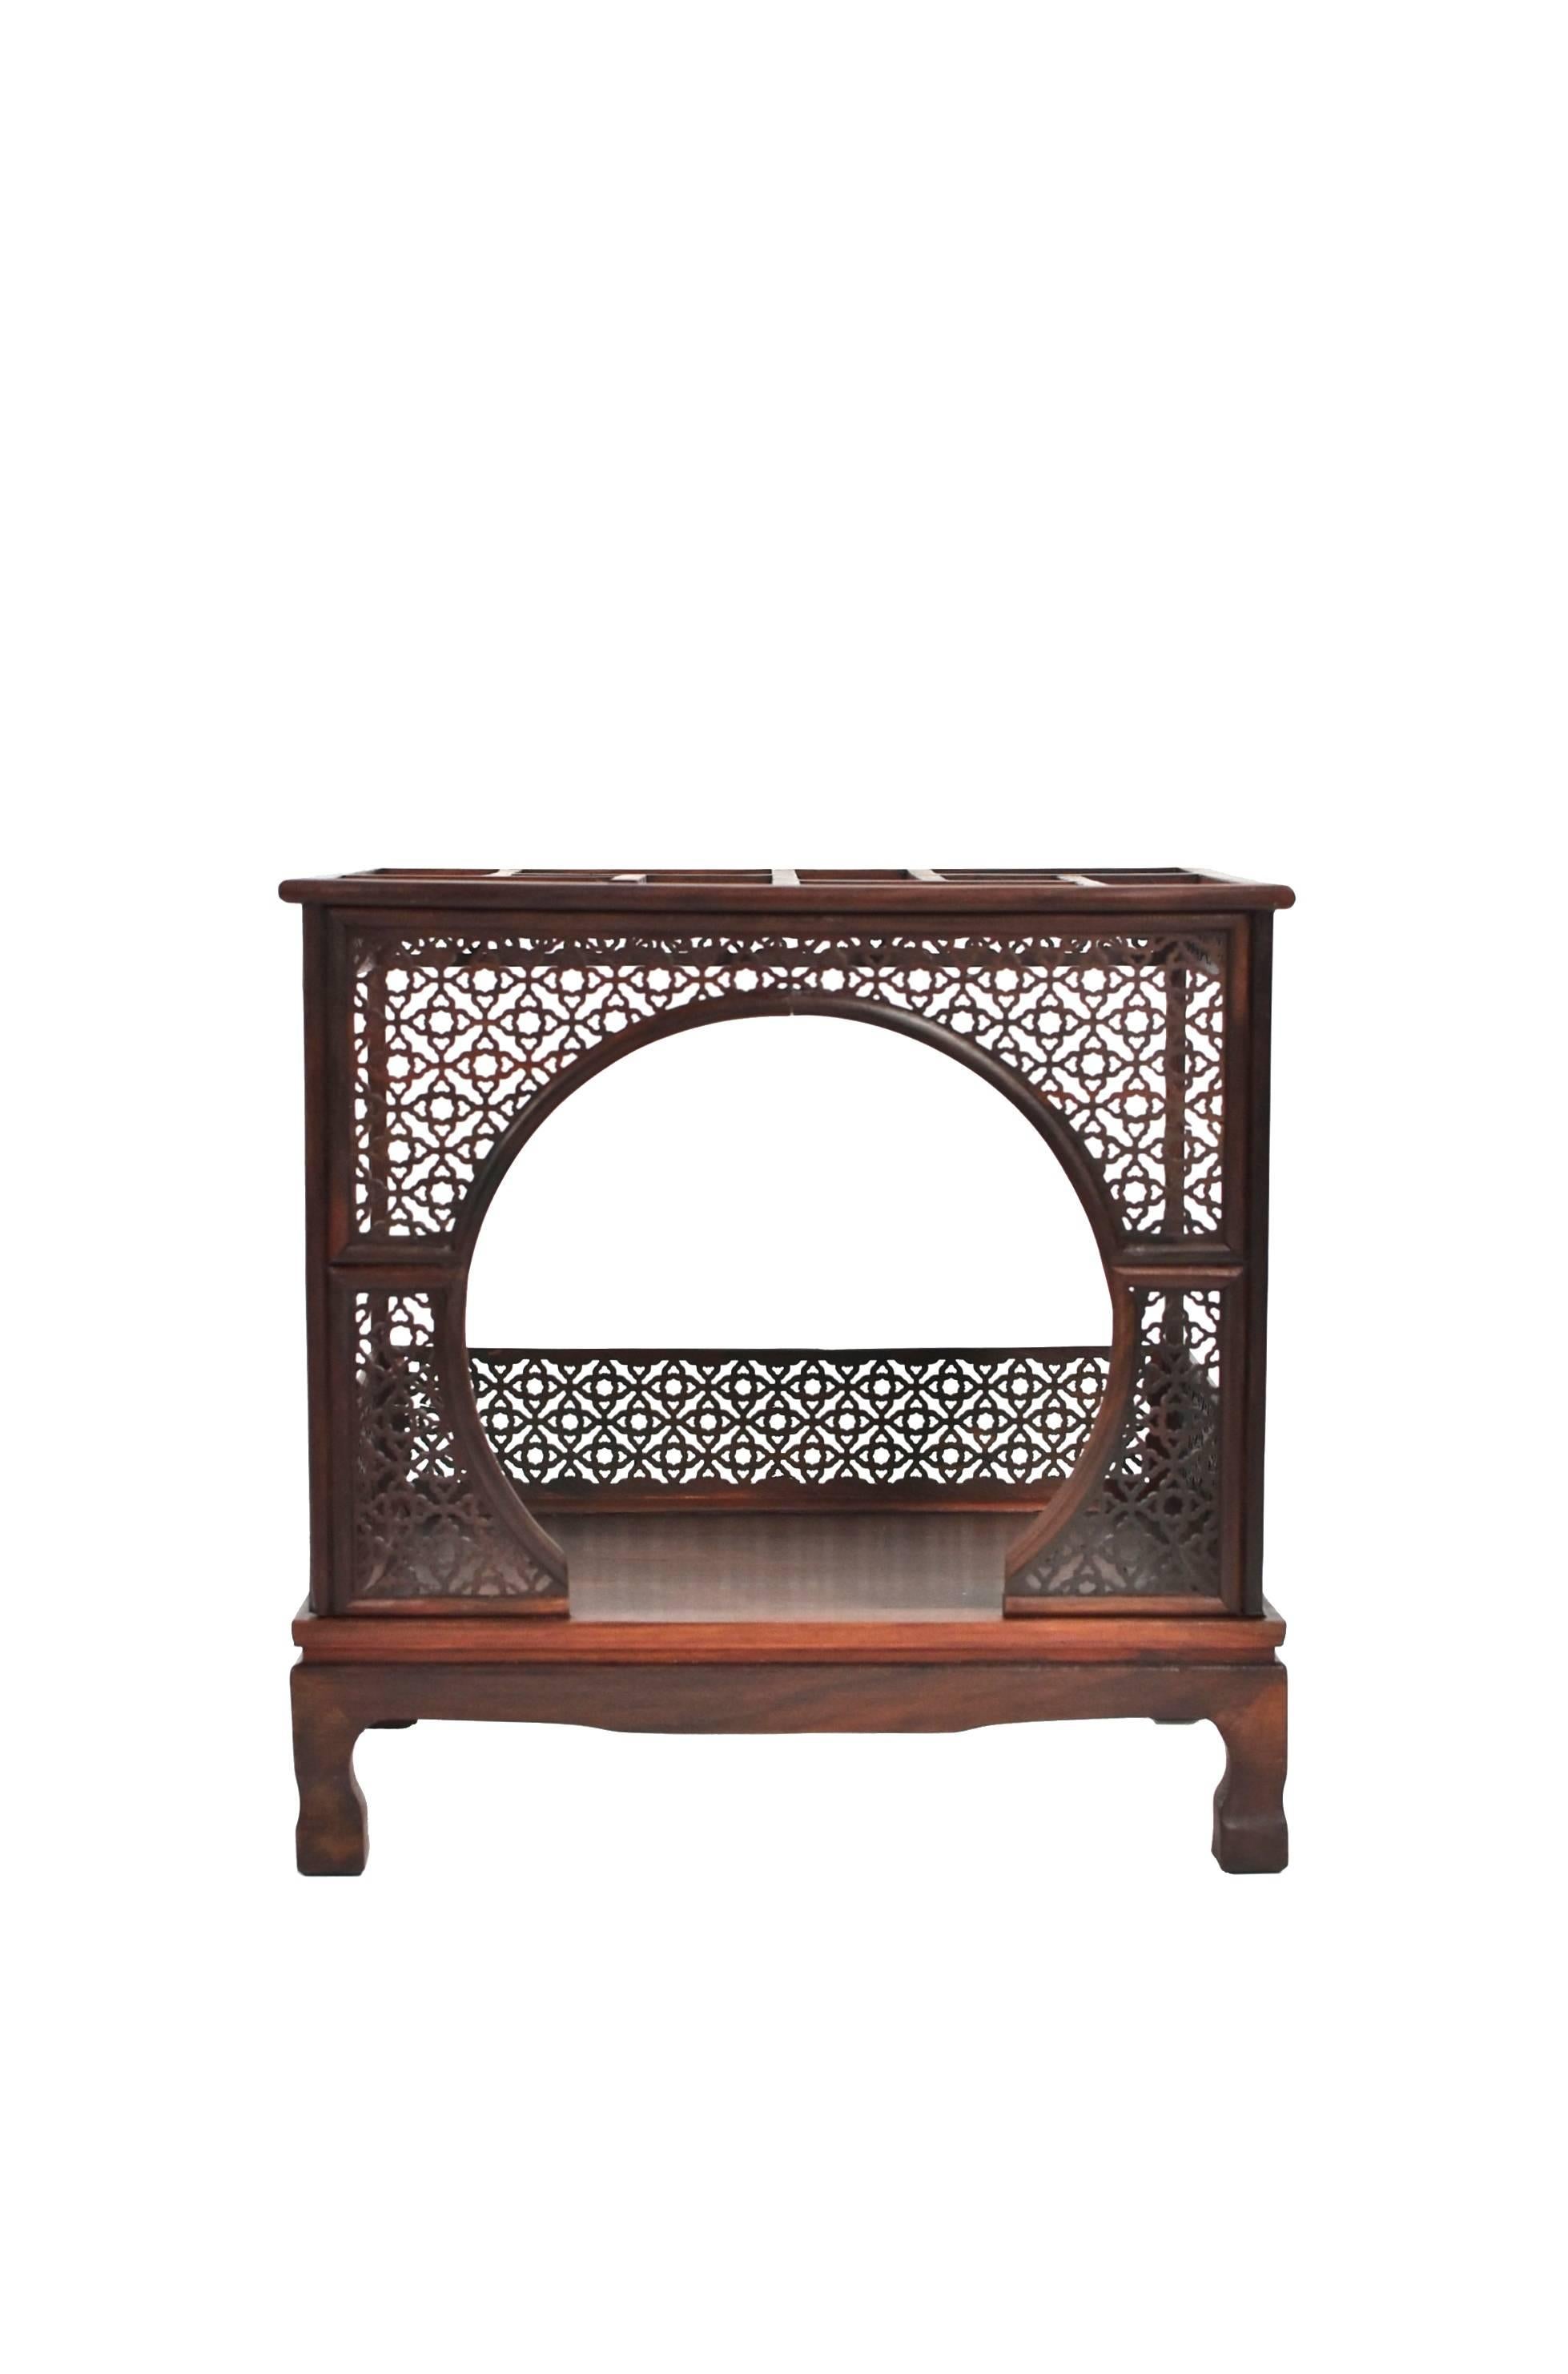 Beautiful miniature, finely carved model is the exact replica of a Chinese traditional moon bed. The bed is decorated on all sides by carved panels in an intricate pierced pattern. The moon entrance is dramatic and very romantic. The top of the bed